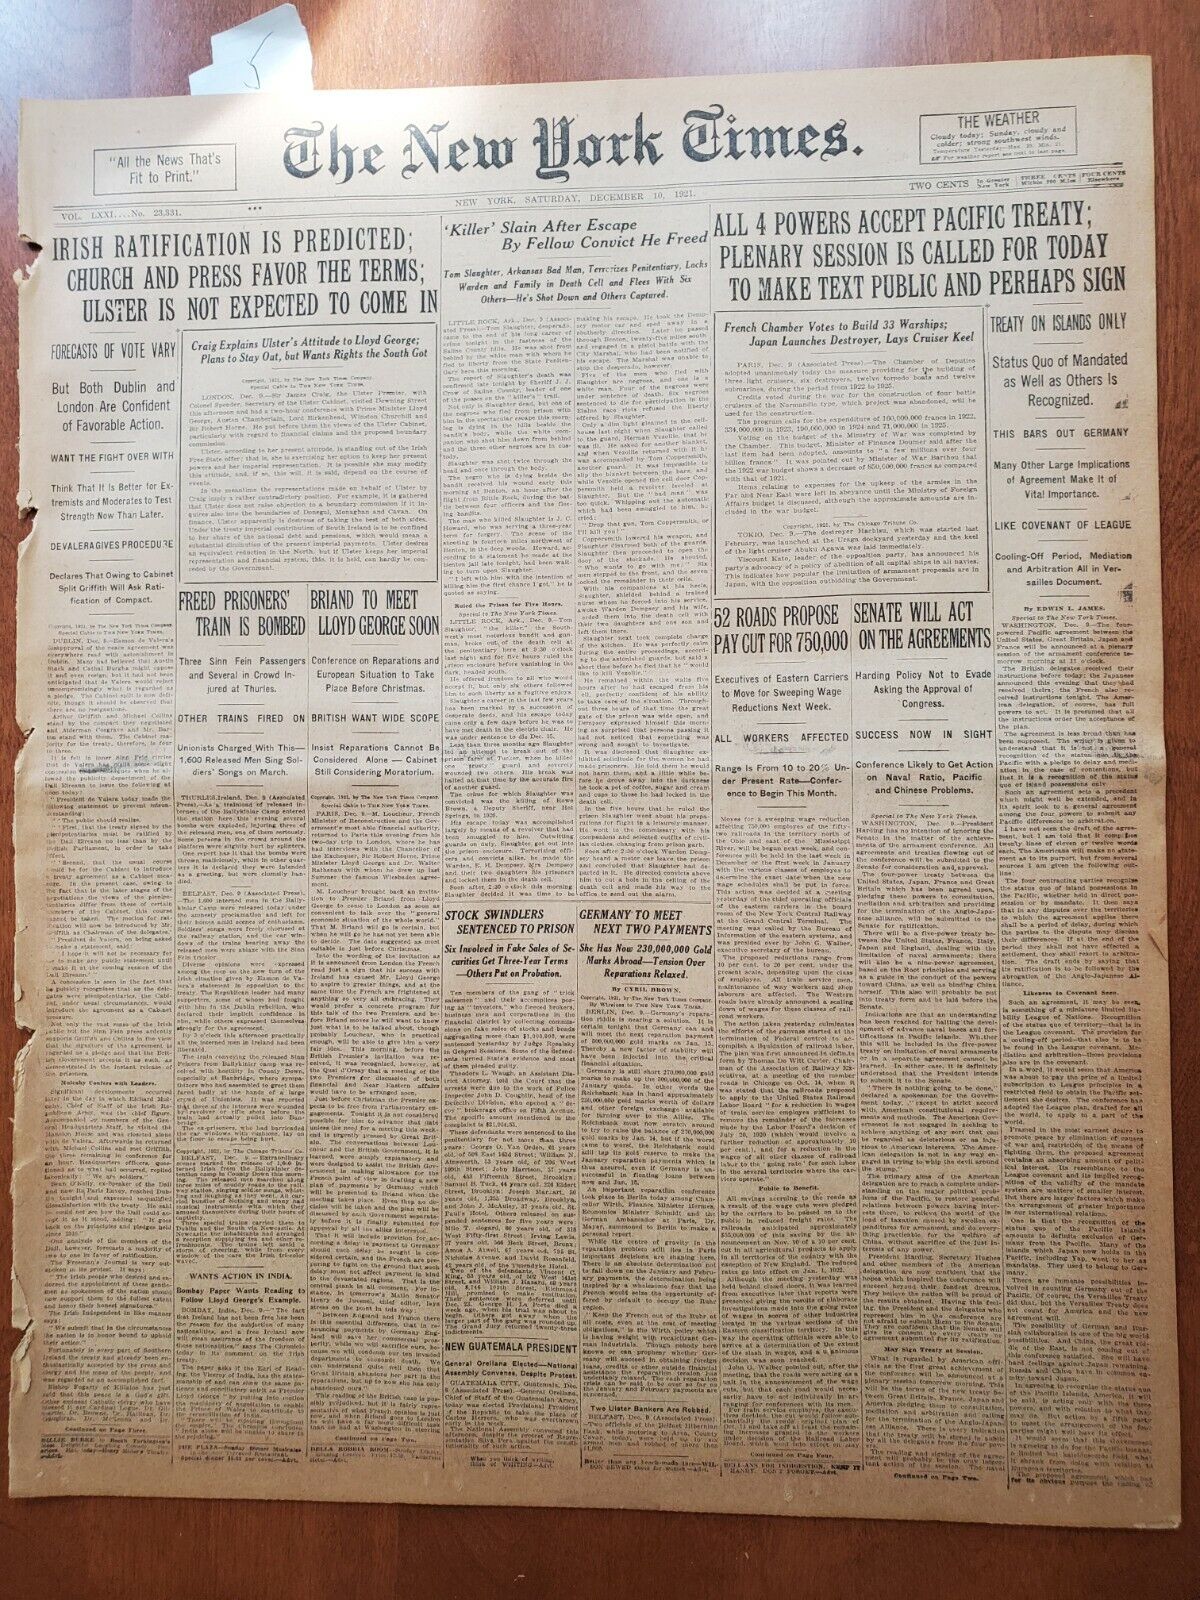 1921 DECEMBER 10 NEW YORK TIMES - ALL 4 POWERS ACCEPT PACIFIC TREATY - NT 8038